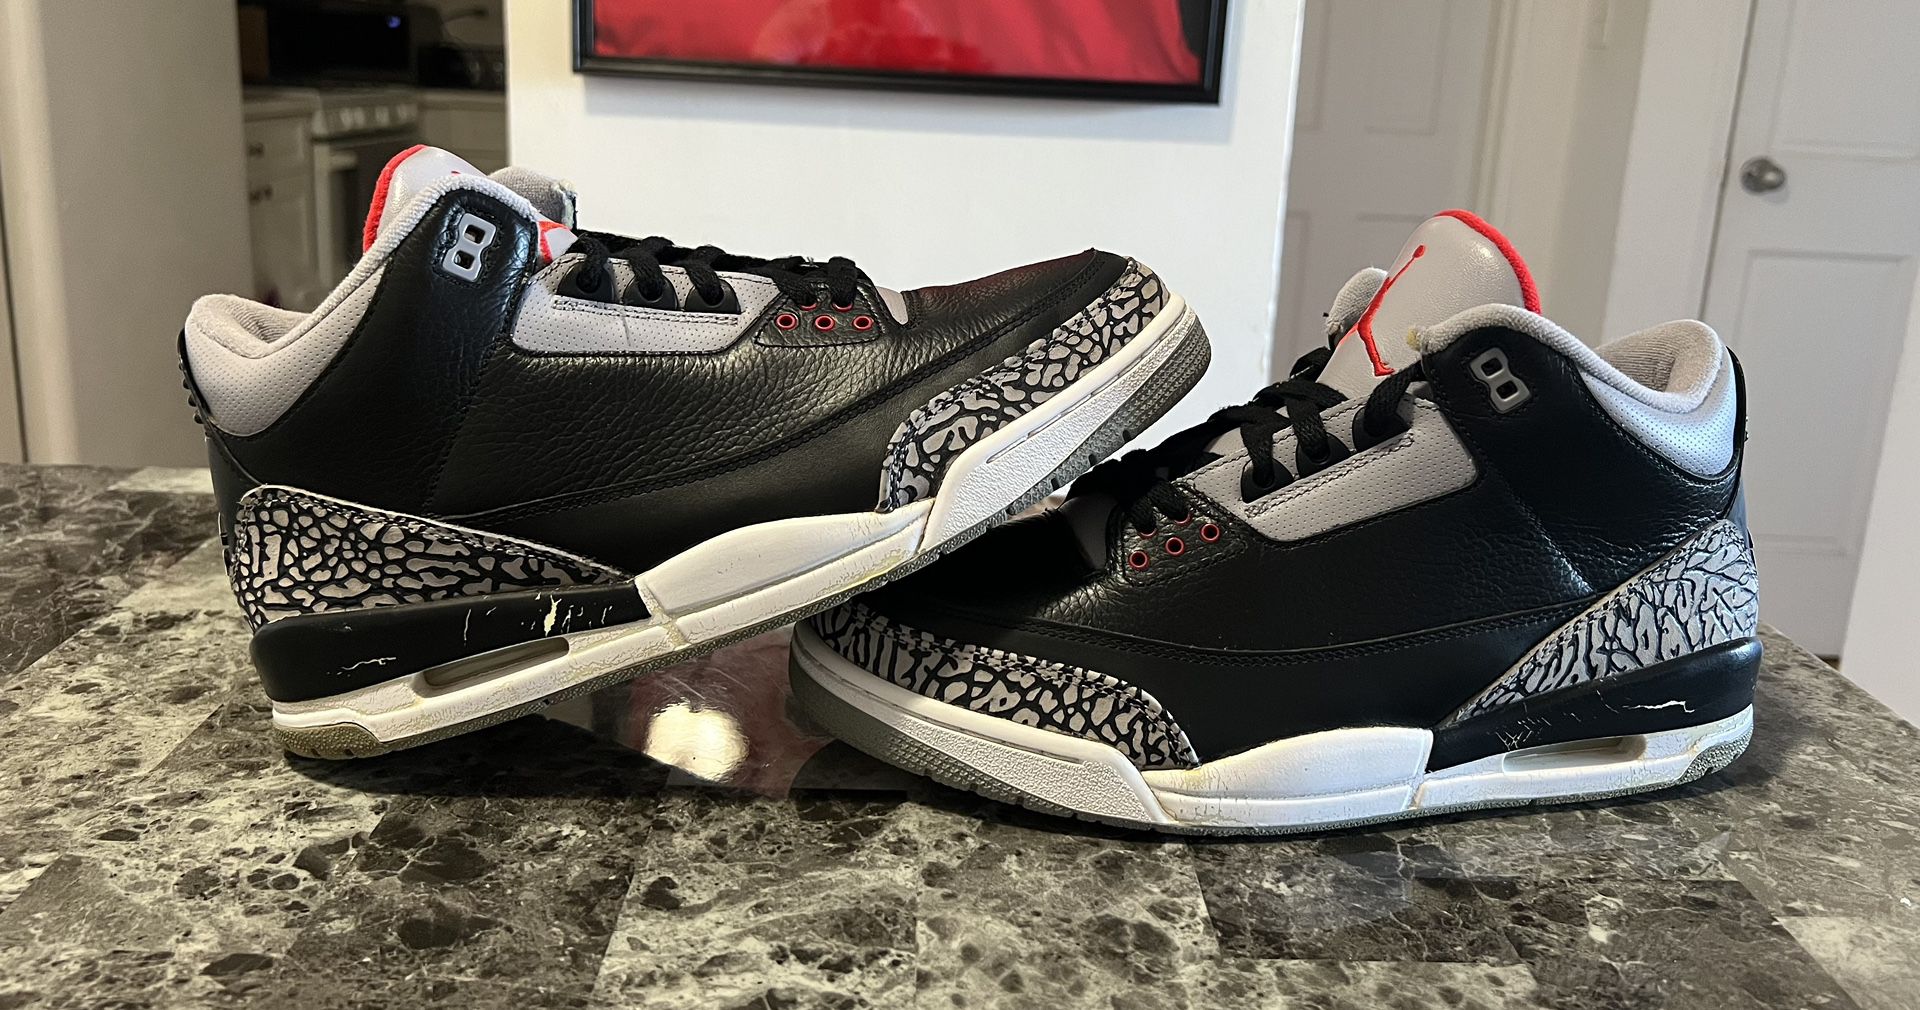 2008 Jordan 3 Retro “Black Cement CDP” - Size  for Sale in The Bronx,  New York - OfferUp